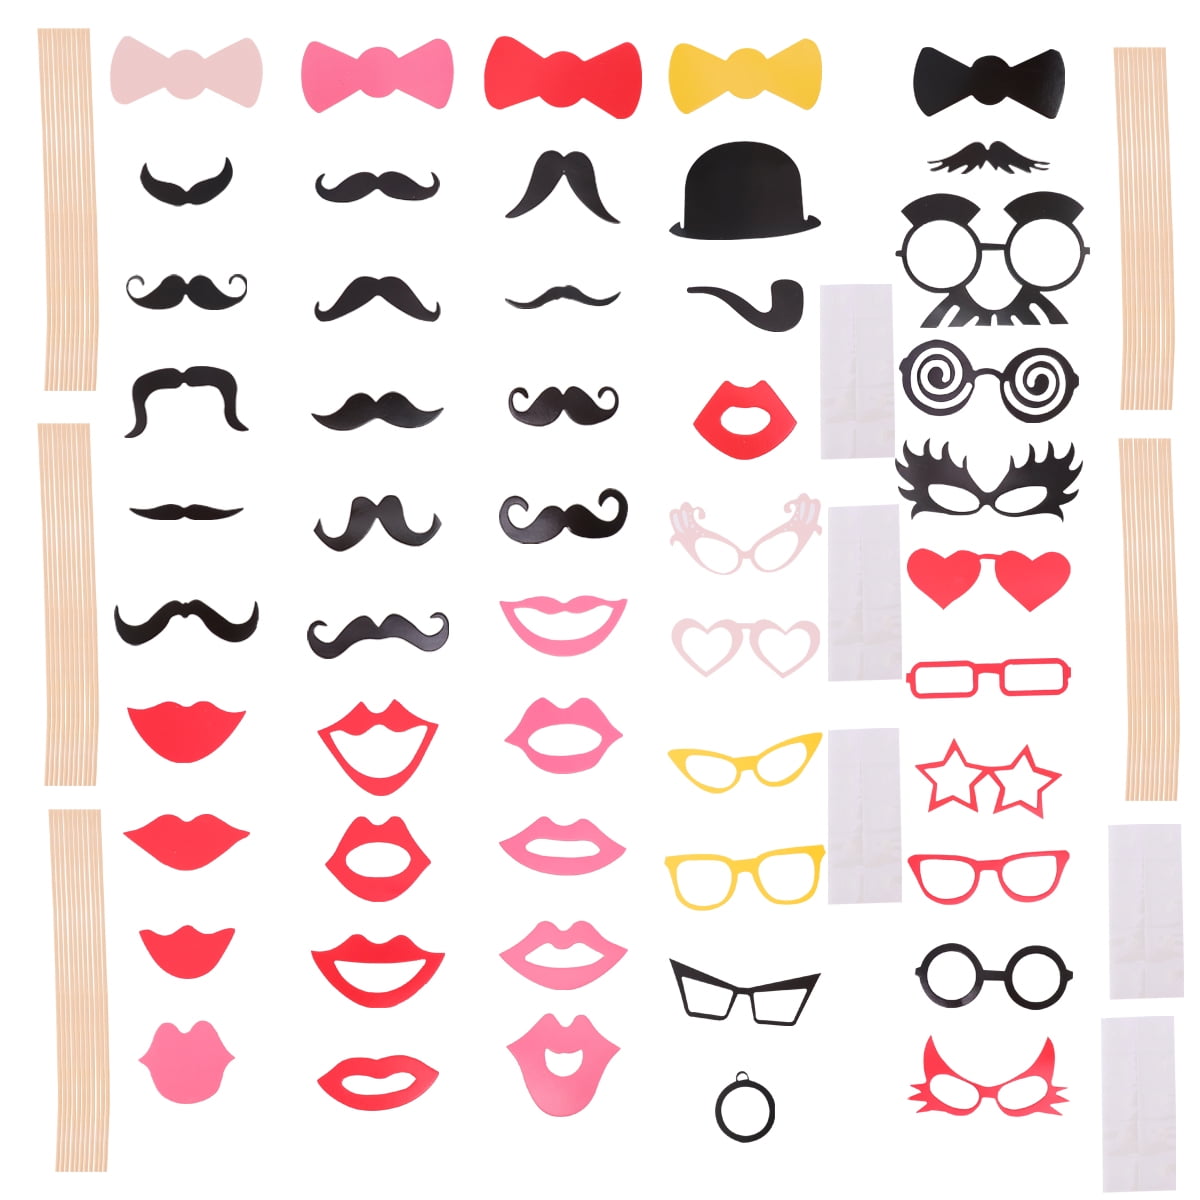 Jzhen Birthday Photo Booth Props 76pcs Photobooth Prop Funny Selfie Accessories Decoration Supplies Mustache Hat Glasses Tie for Kids & Adults